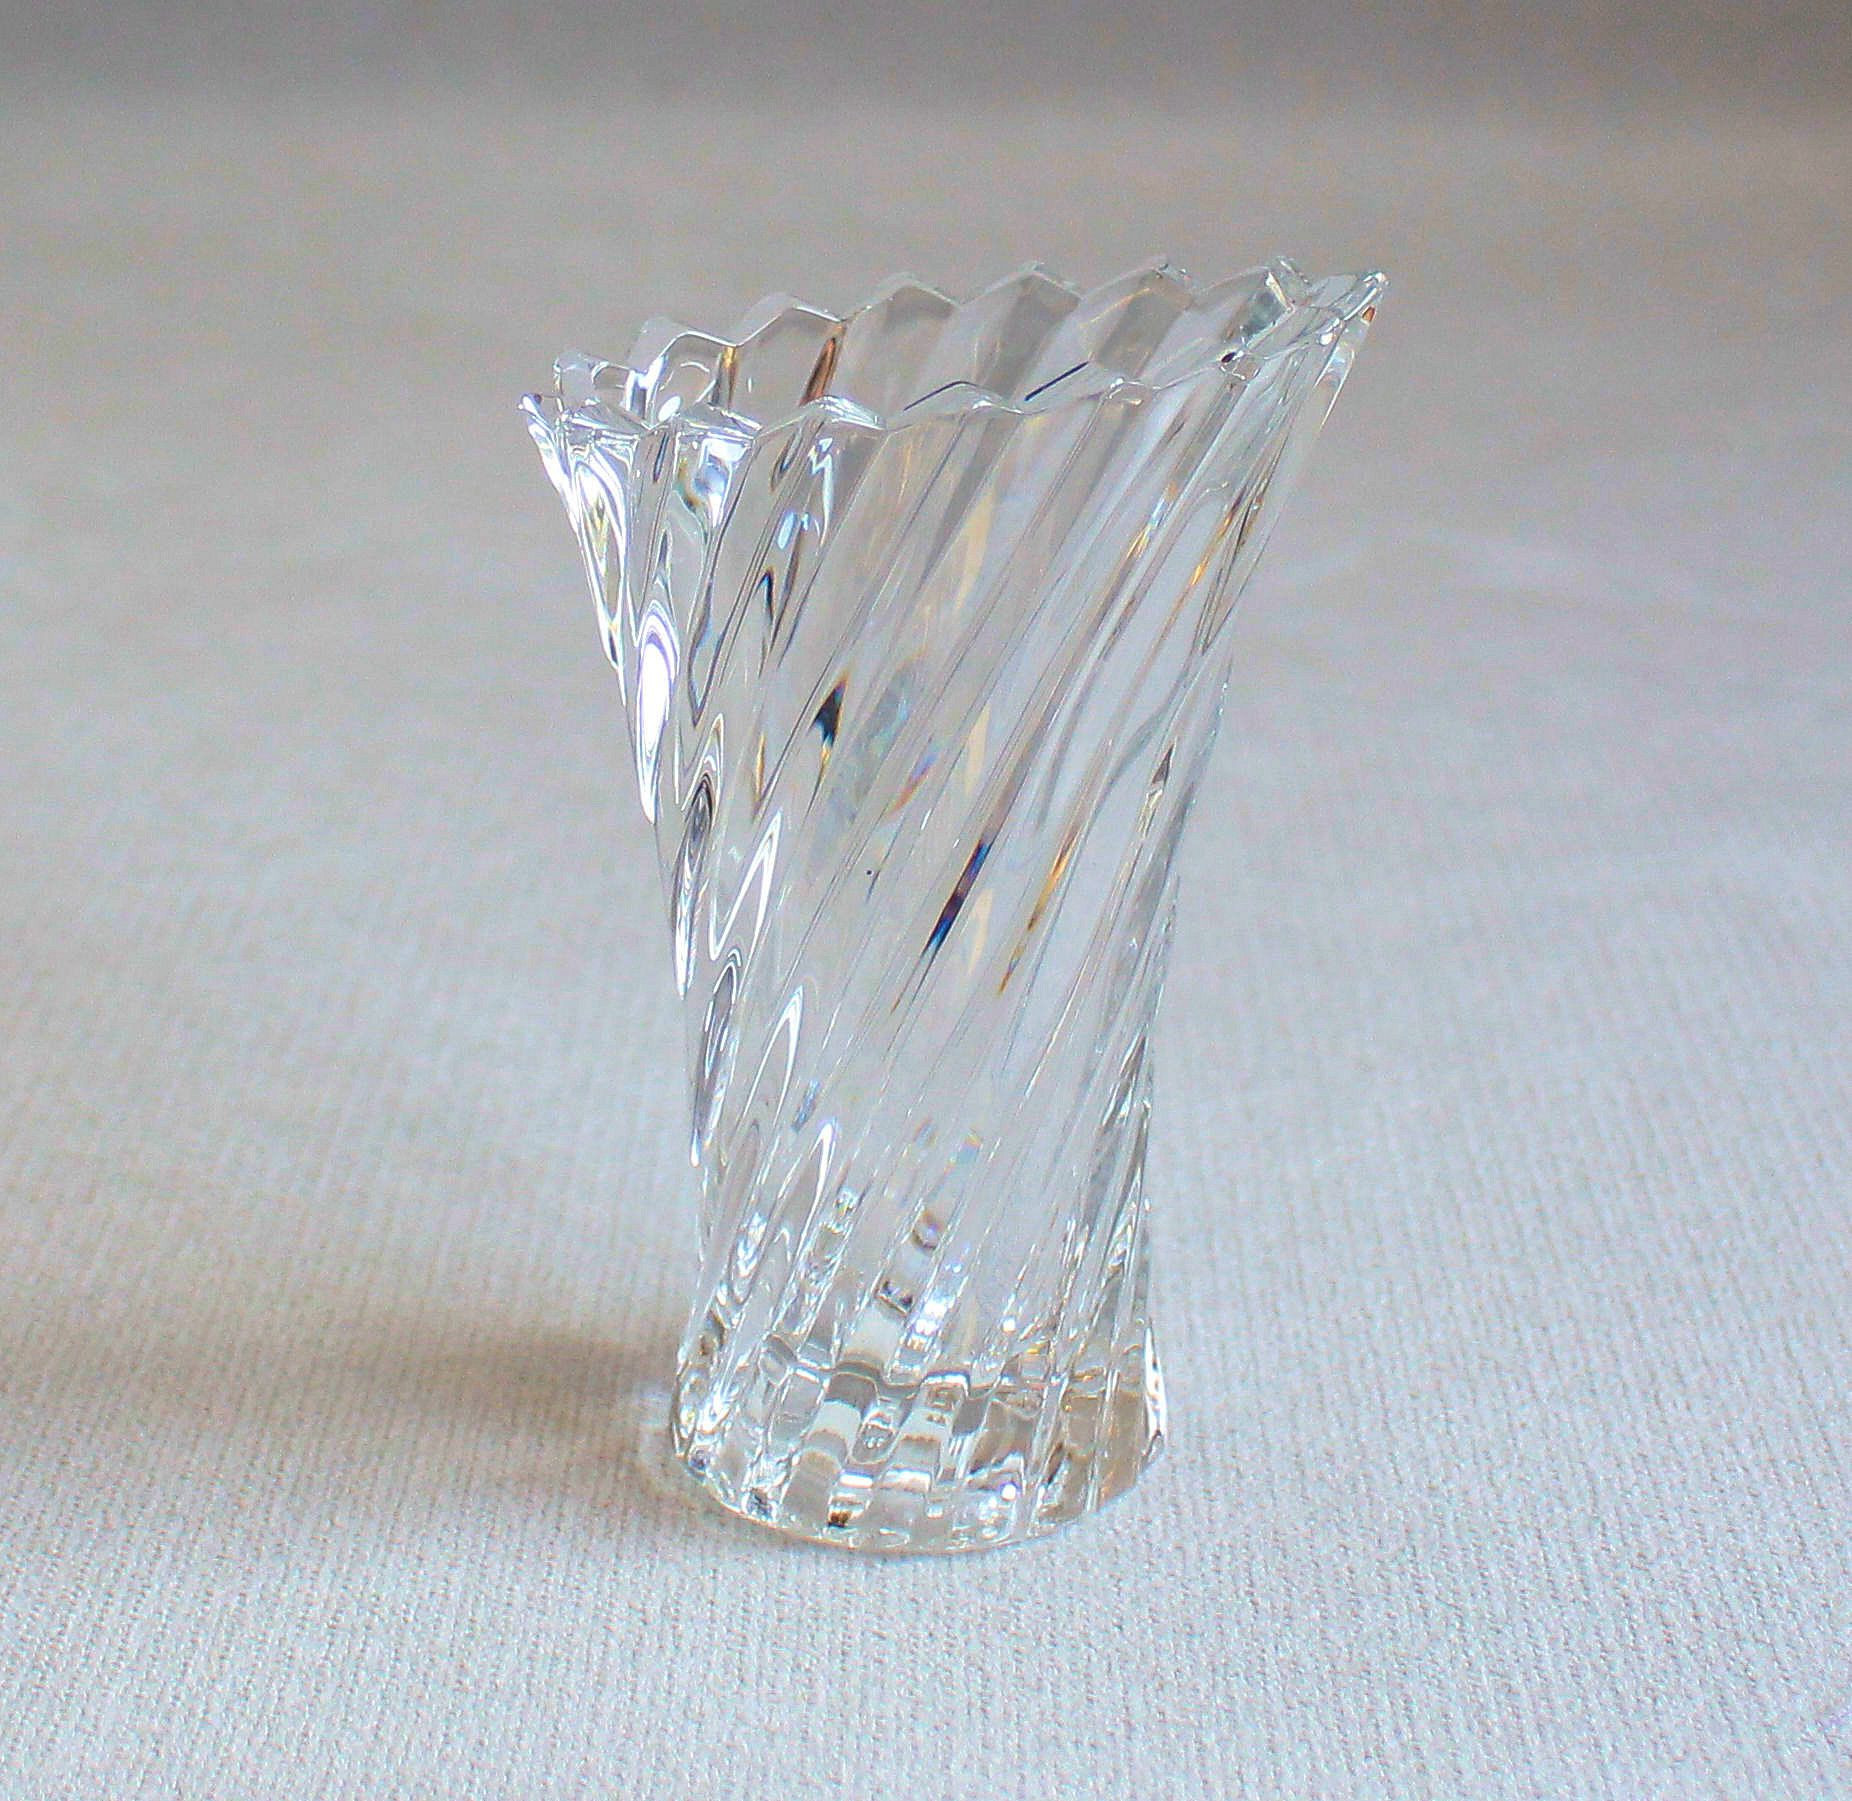 14 Ideal Mini Clear Glass Bud Vases 2024 free download mini clear glass bud vases of 5 vintage purple vasevintage glass vase vessel gold trim for 5 vintage purple vasevintage glass vase vessel gold trim souvenir